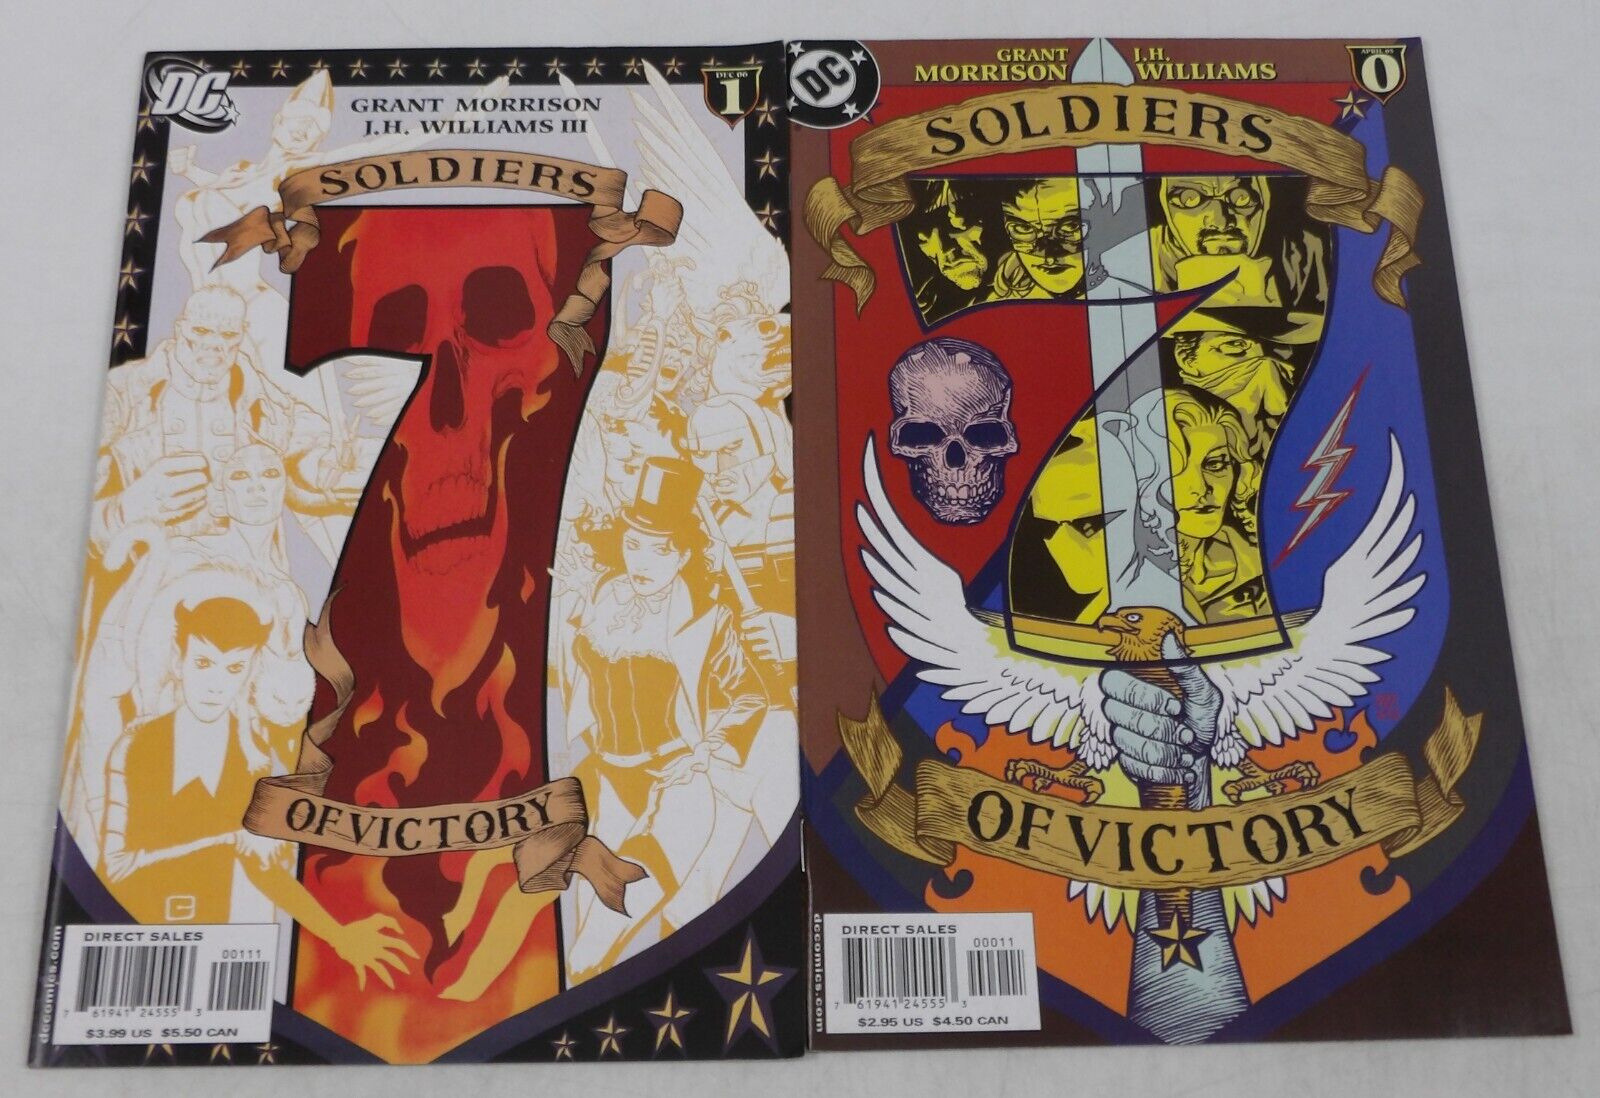 Seven Soldiers of Victory #0-1 VF/NM complete series - Grant Morrison DC Comics